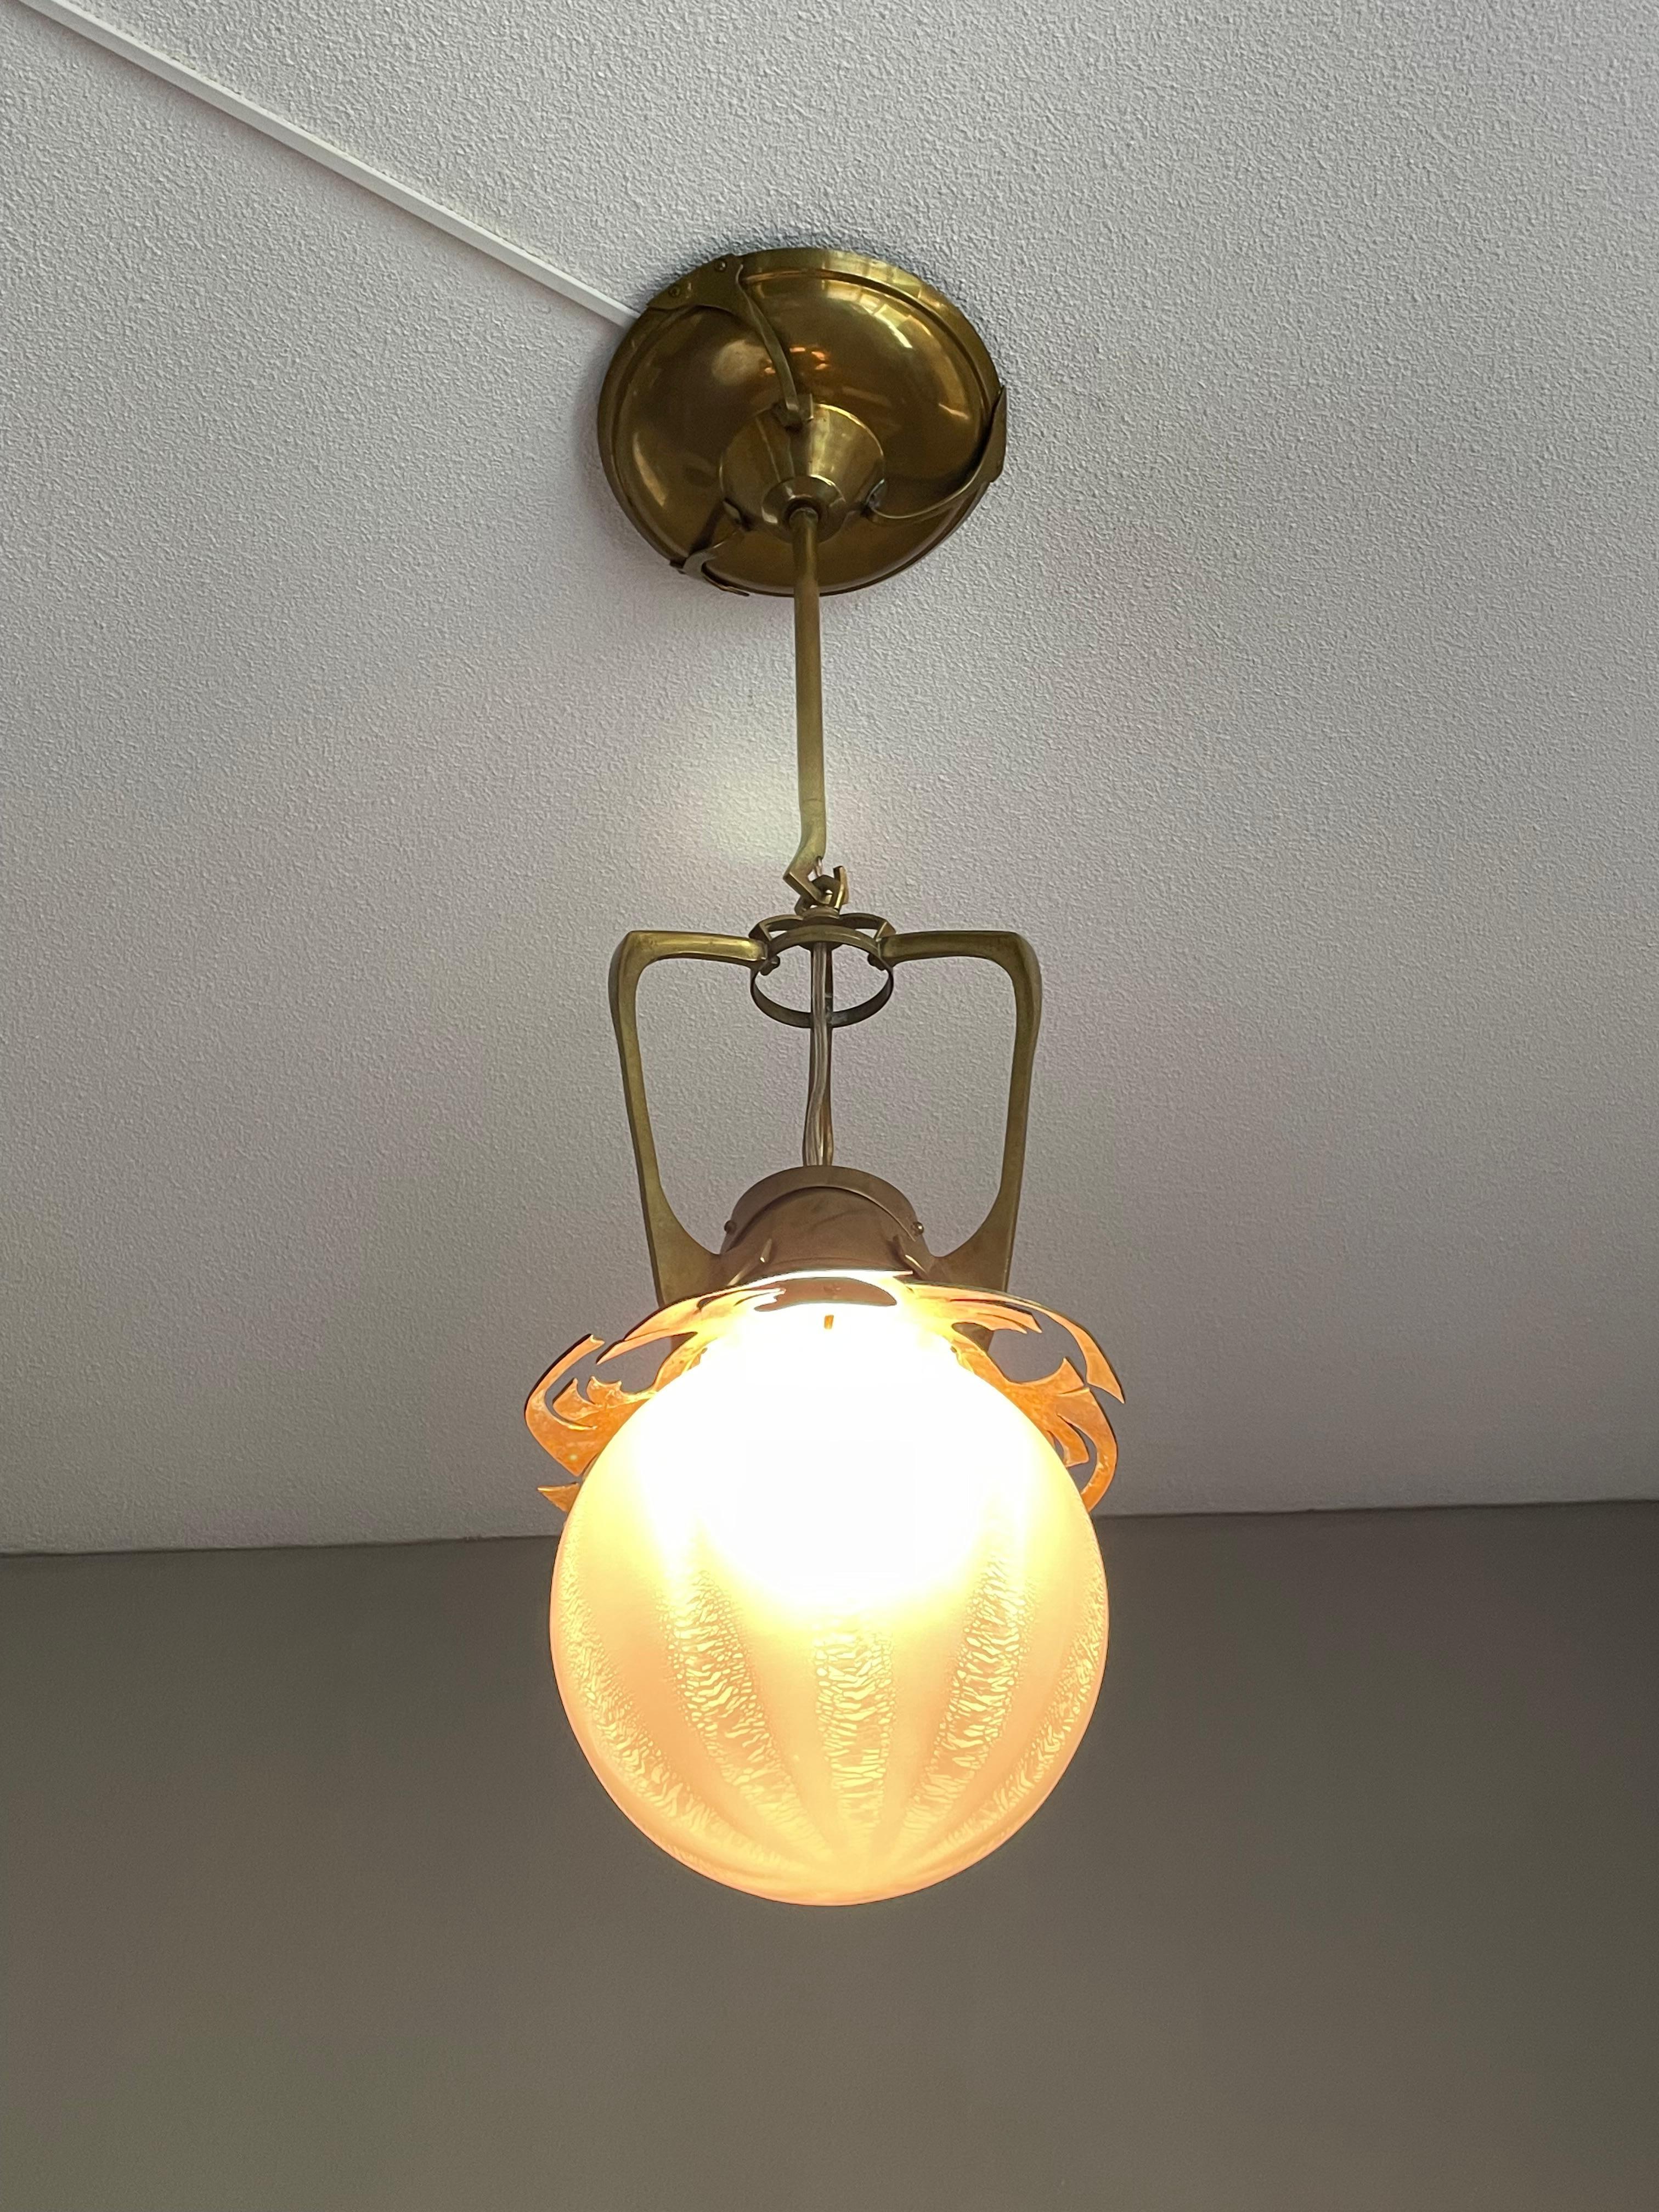 Unique Dutch Arts & Crafts Brass Pendant Light With Rare Tin Crackle Globe Shade For Sale 1